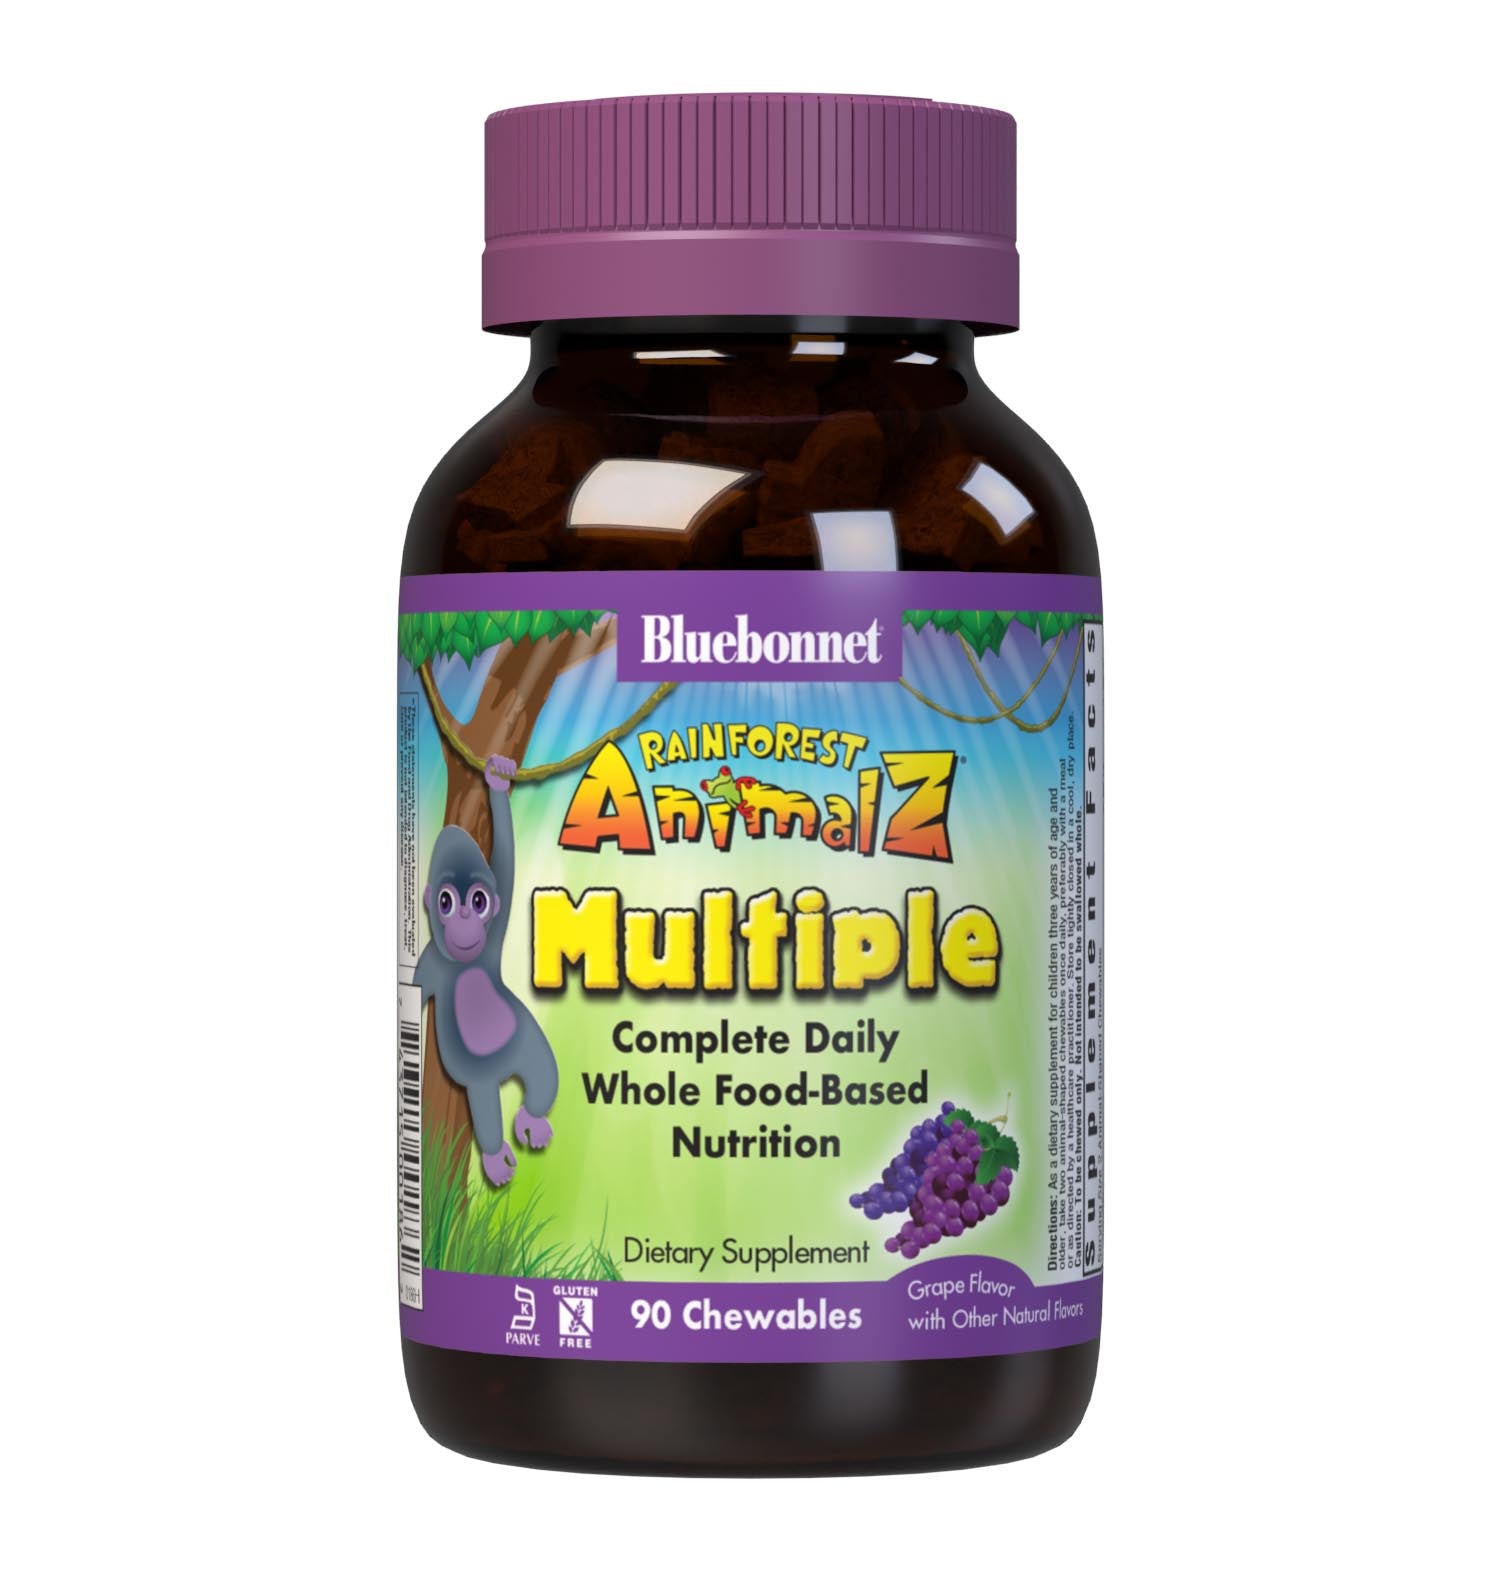 Bluebonnet Rainforest Animalz Whole Food Based Multiple 90 Animal-Shaped Chewable grape flavor tablets help bridge the nutrient gap by providing a comprehensive blend of super fruits and veggies that are rich in essential vitamins and minerals in tasty, delicious flavored chewable tablets to support their growth and developmental needs. #size_90 count